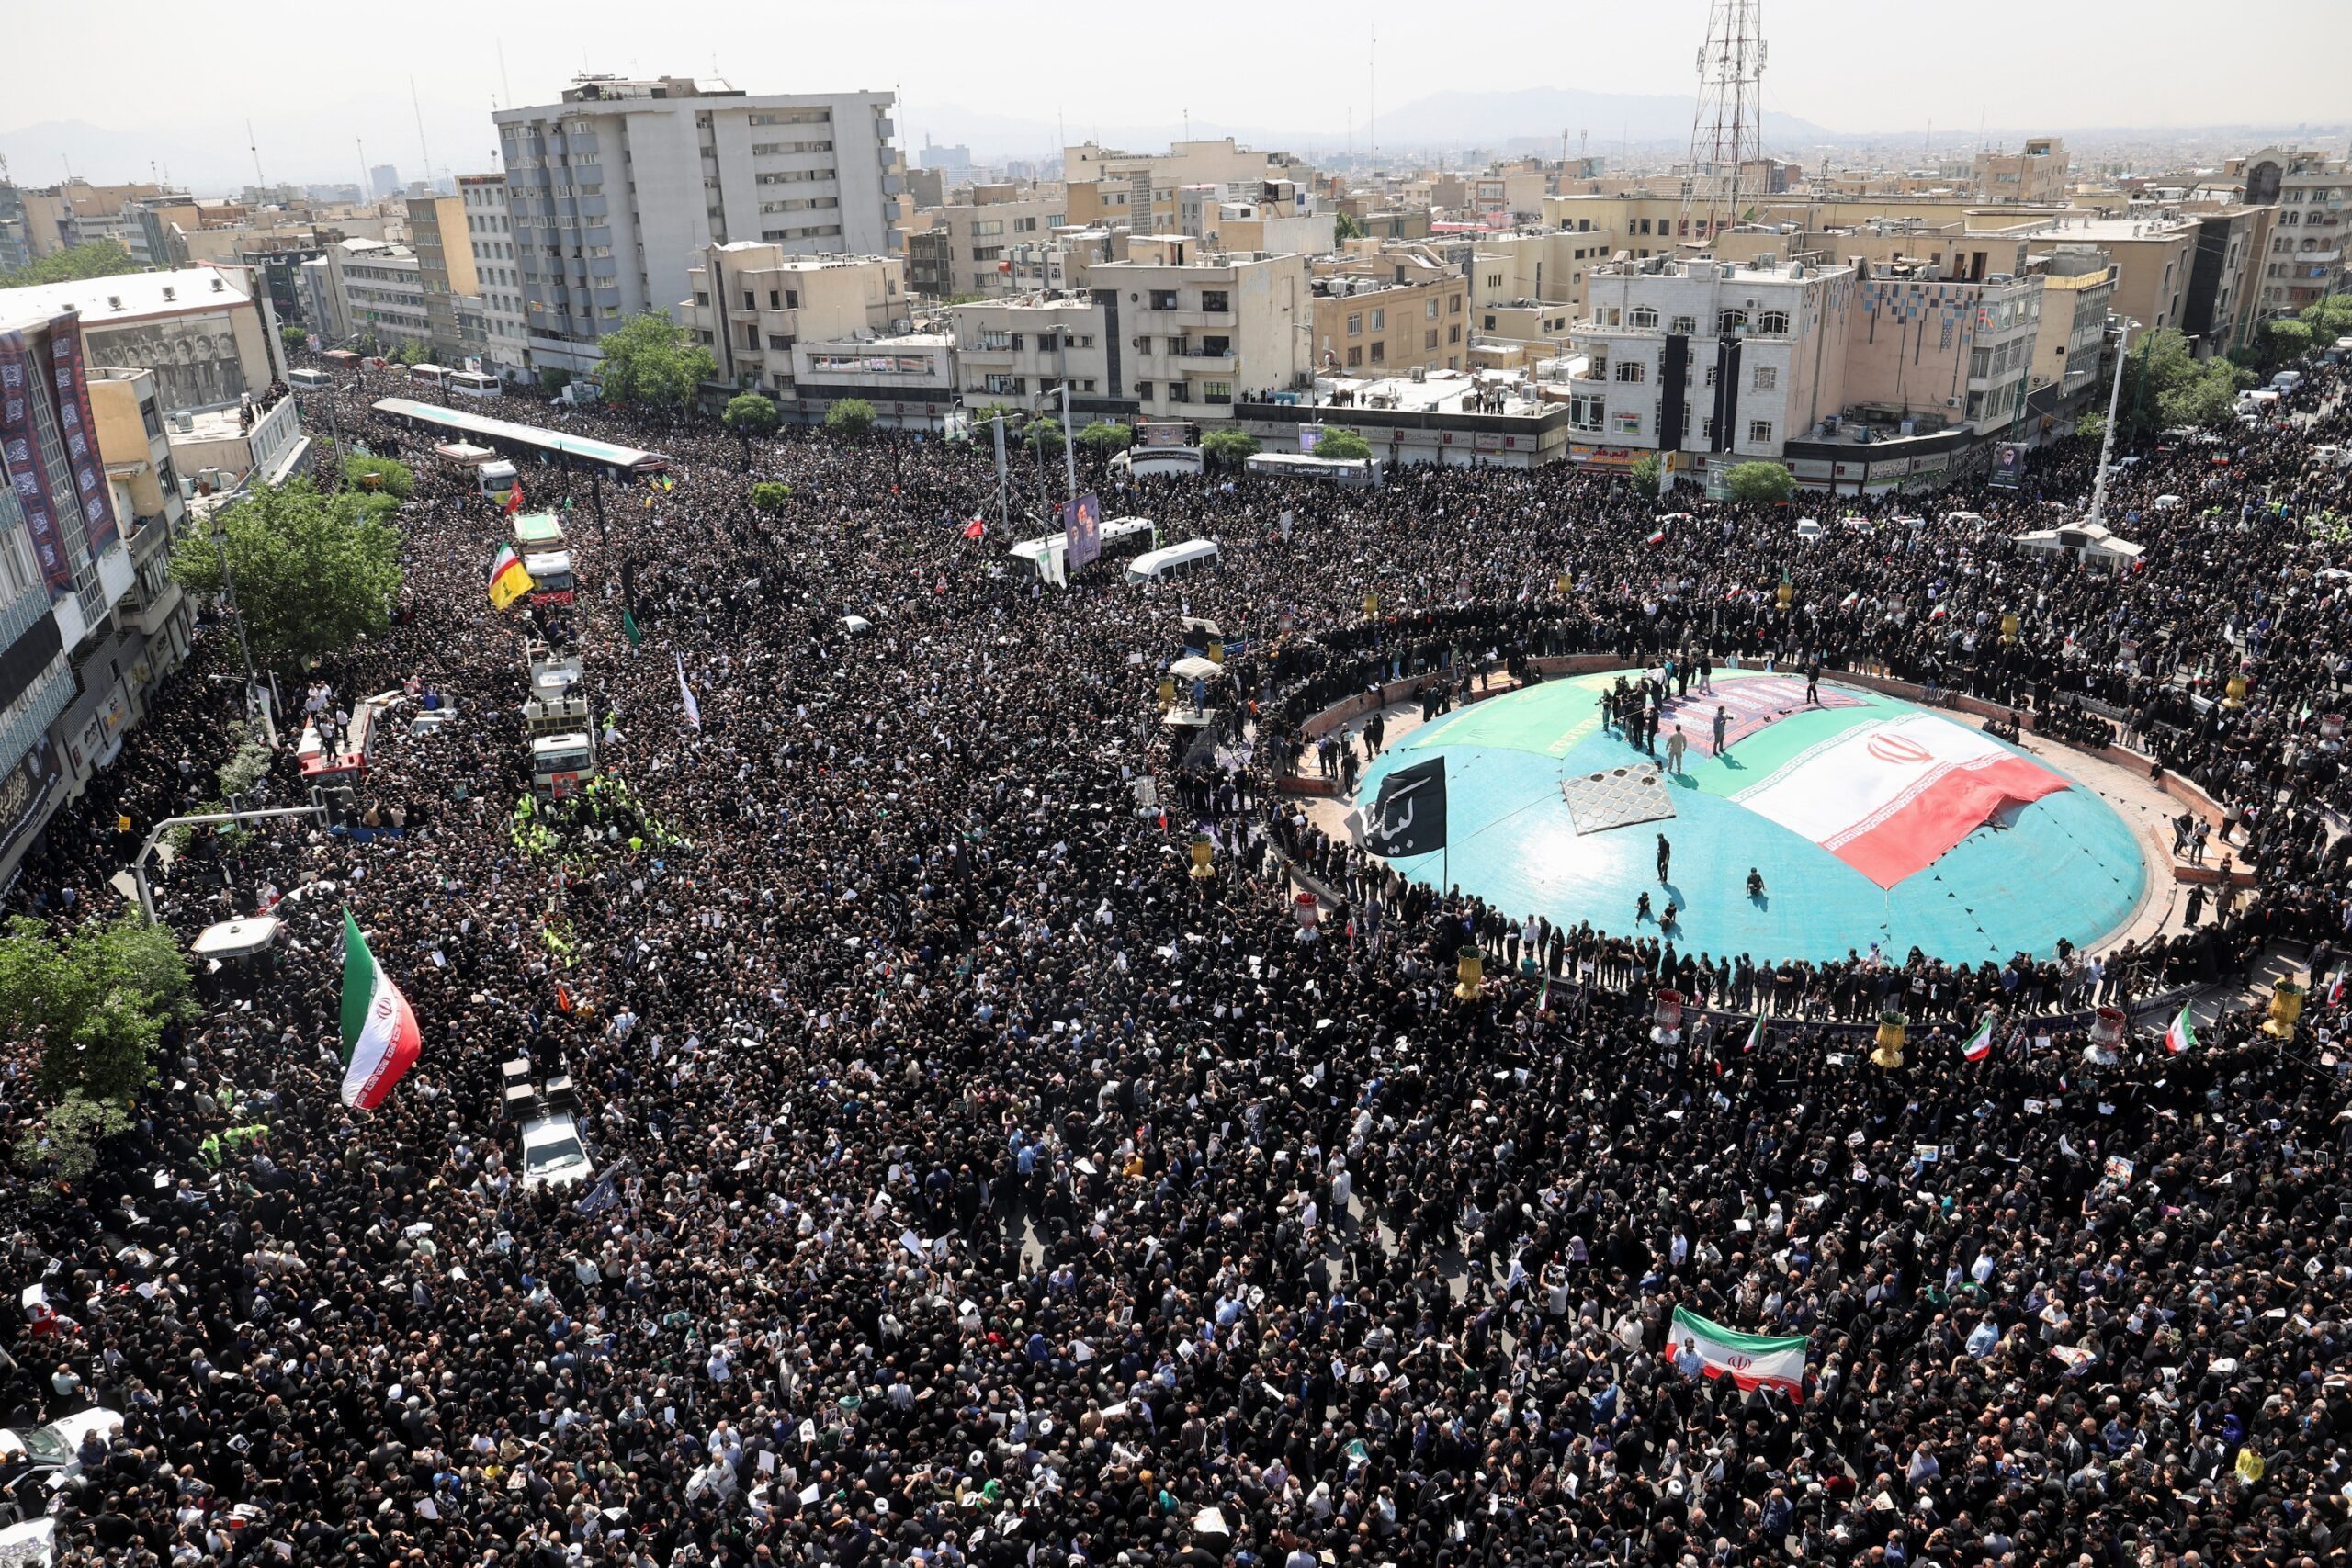 Crowds gather in Tehran for the funeral of President Ebrahim Raisi